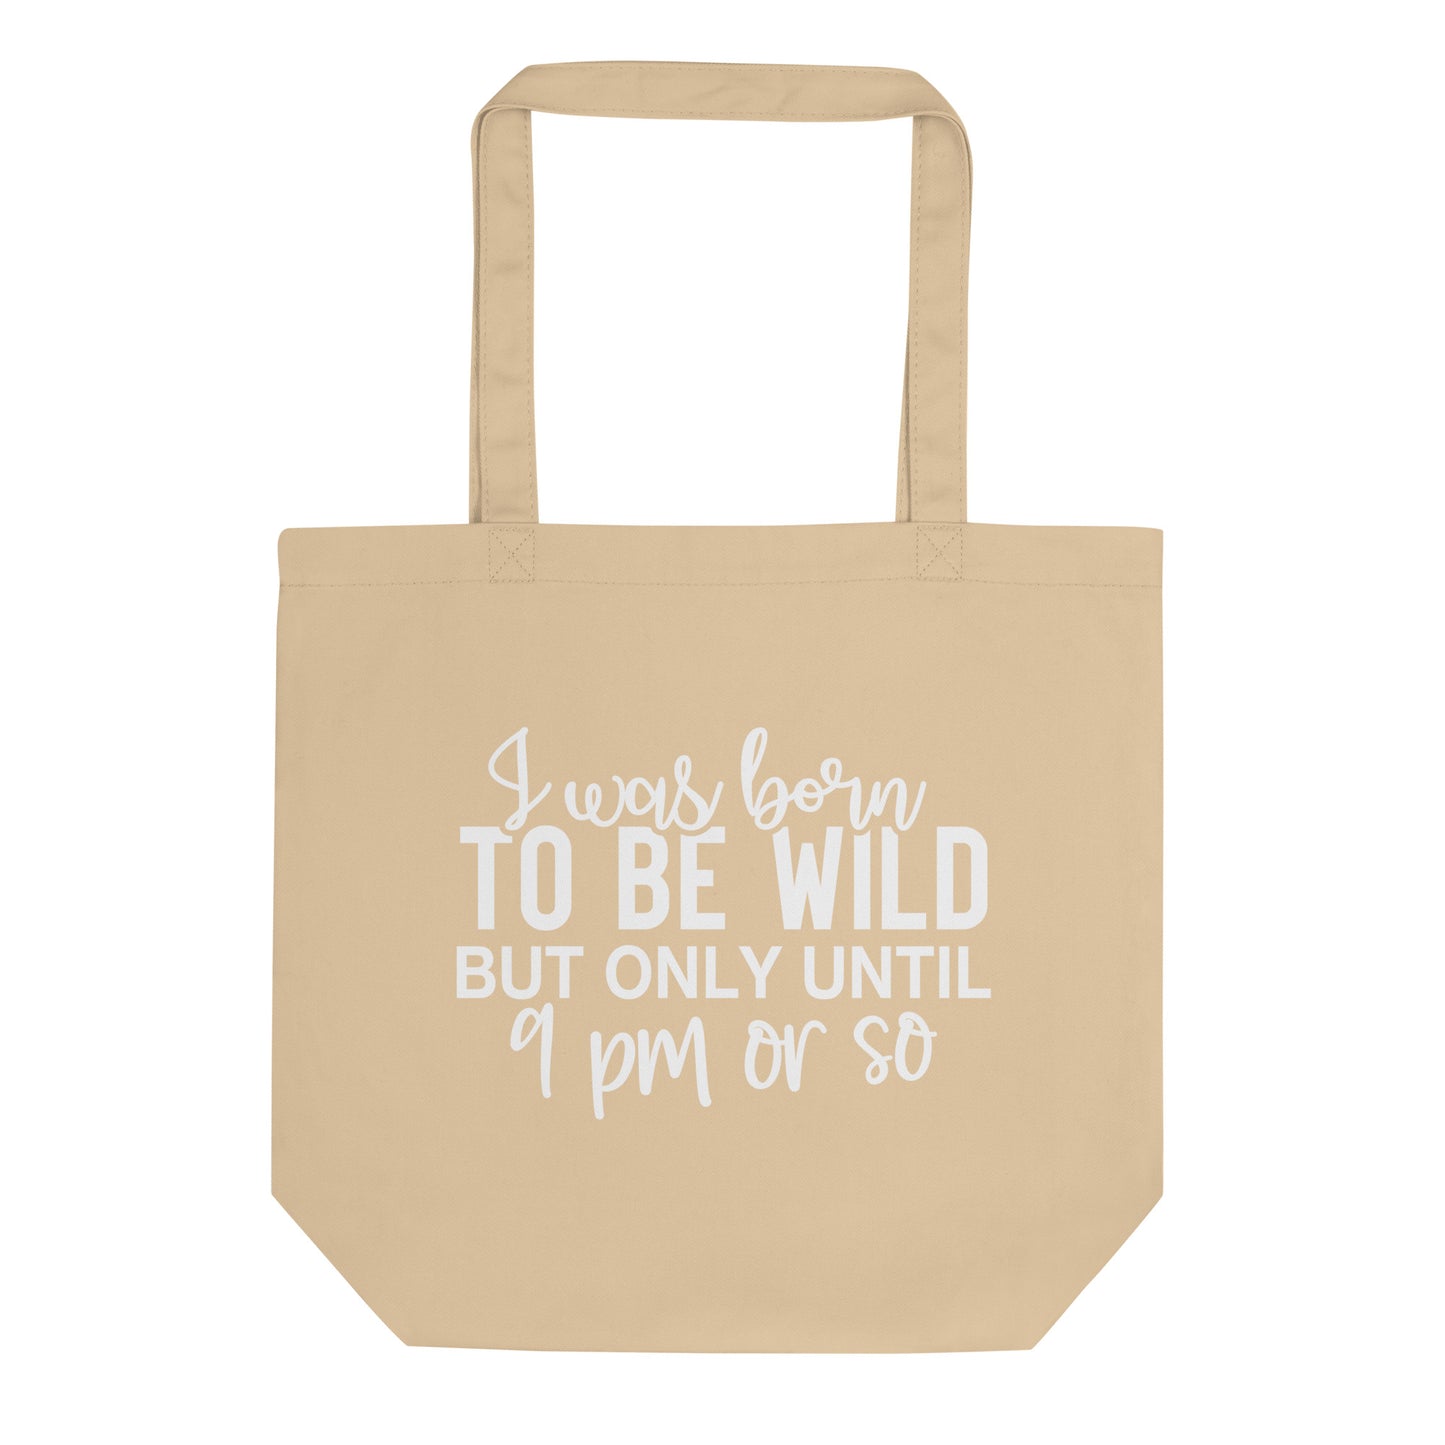 I Was Born to Be Wild but Only until 9PM or So Eco Tote Bag